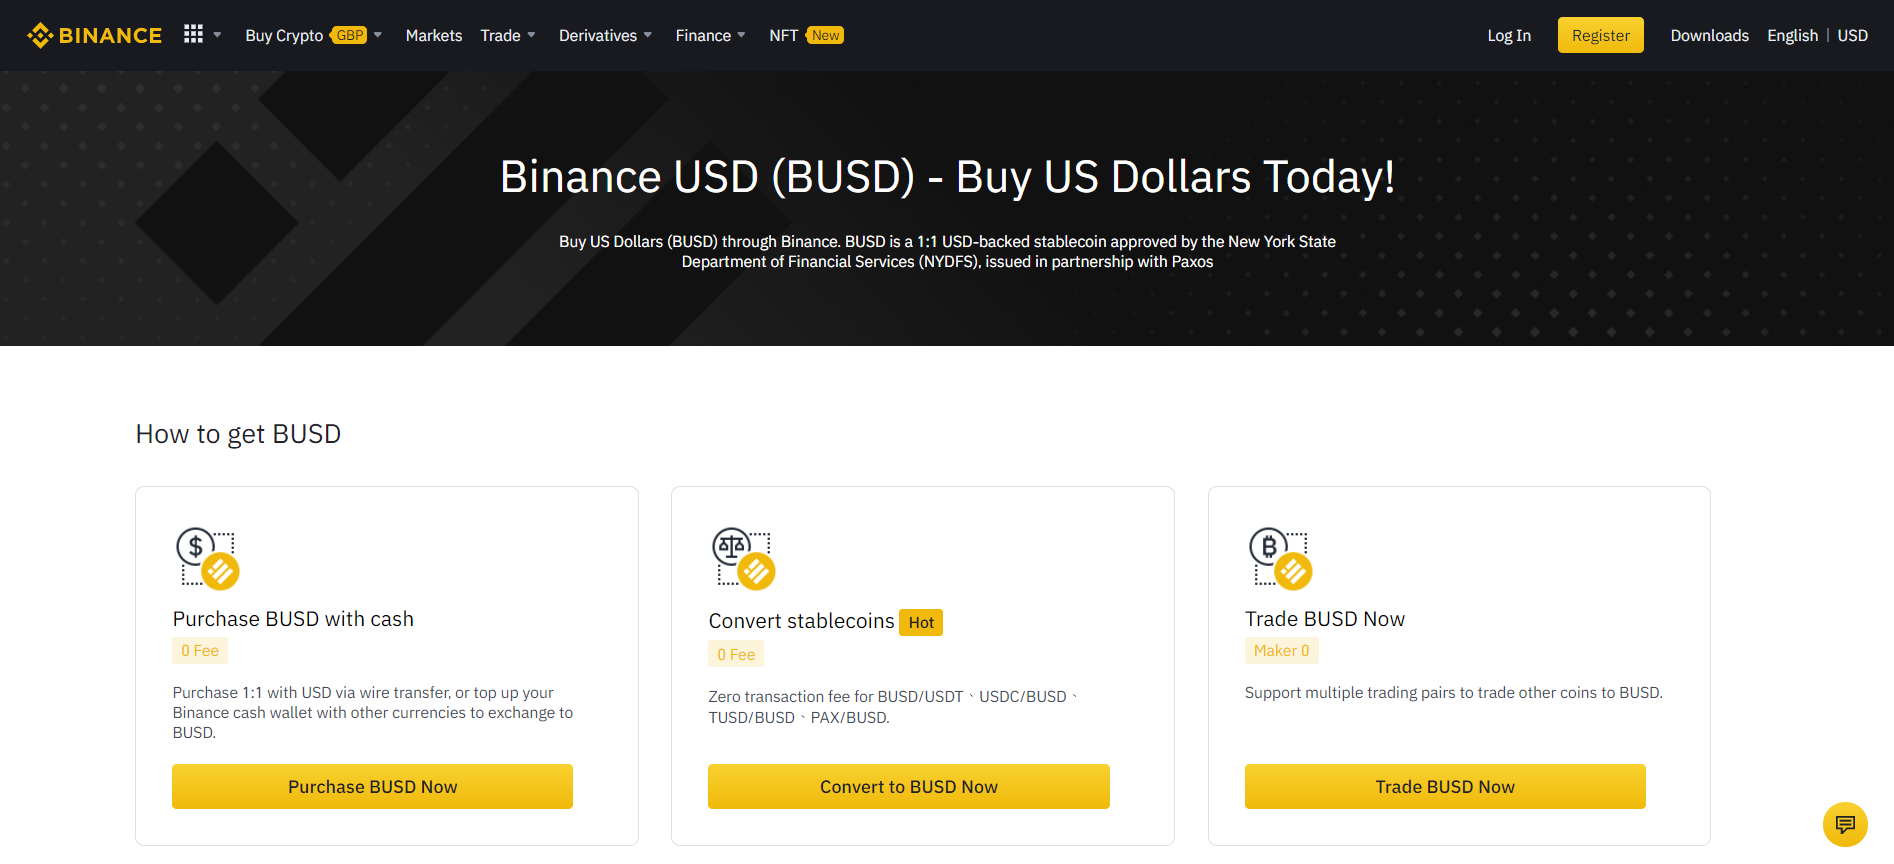 Screen capture of Binance's homepage about its BUSD stablecoin